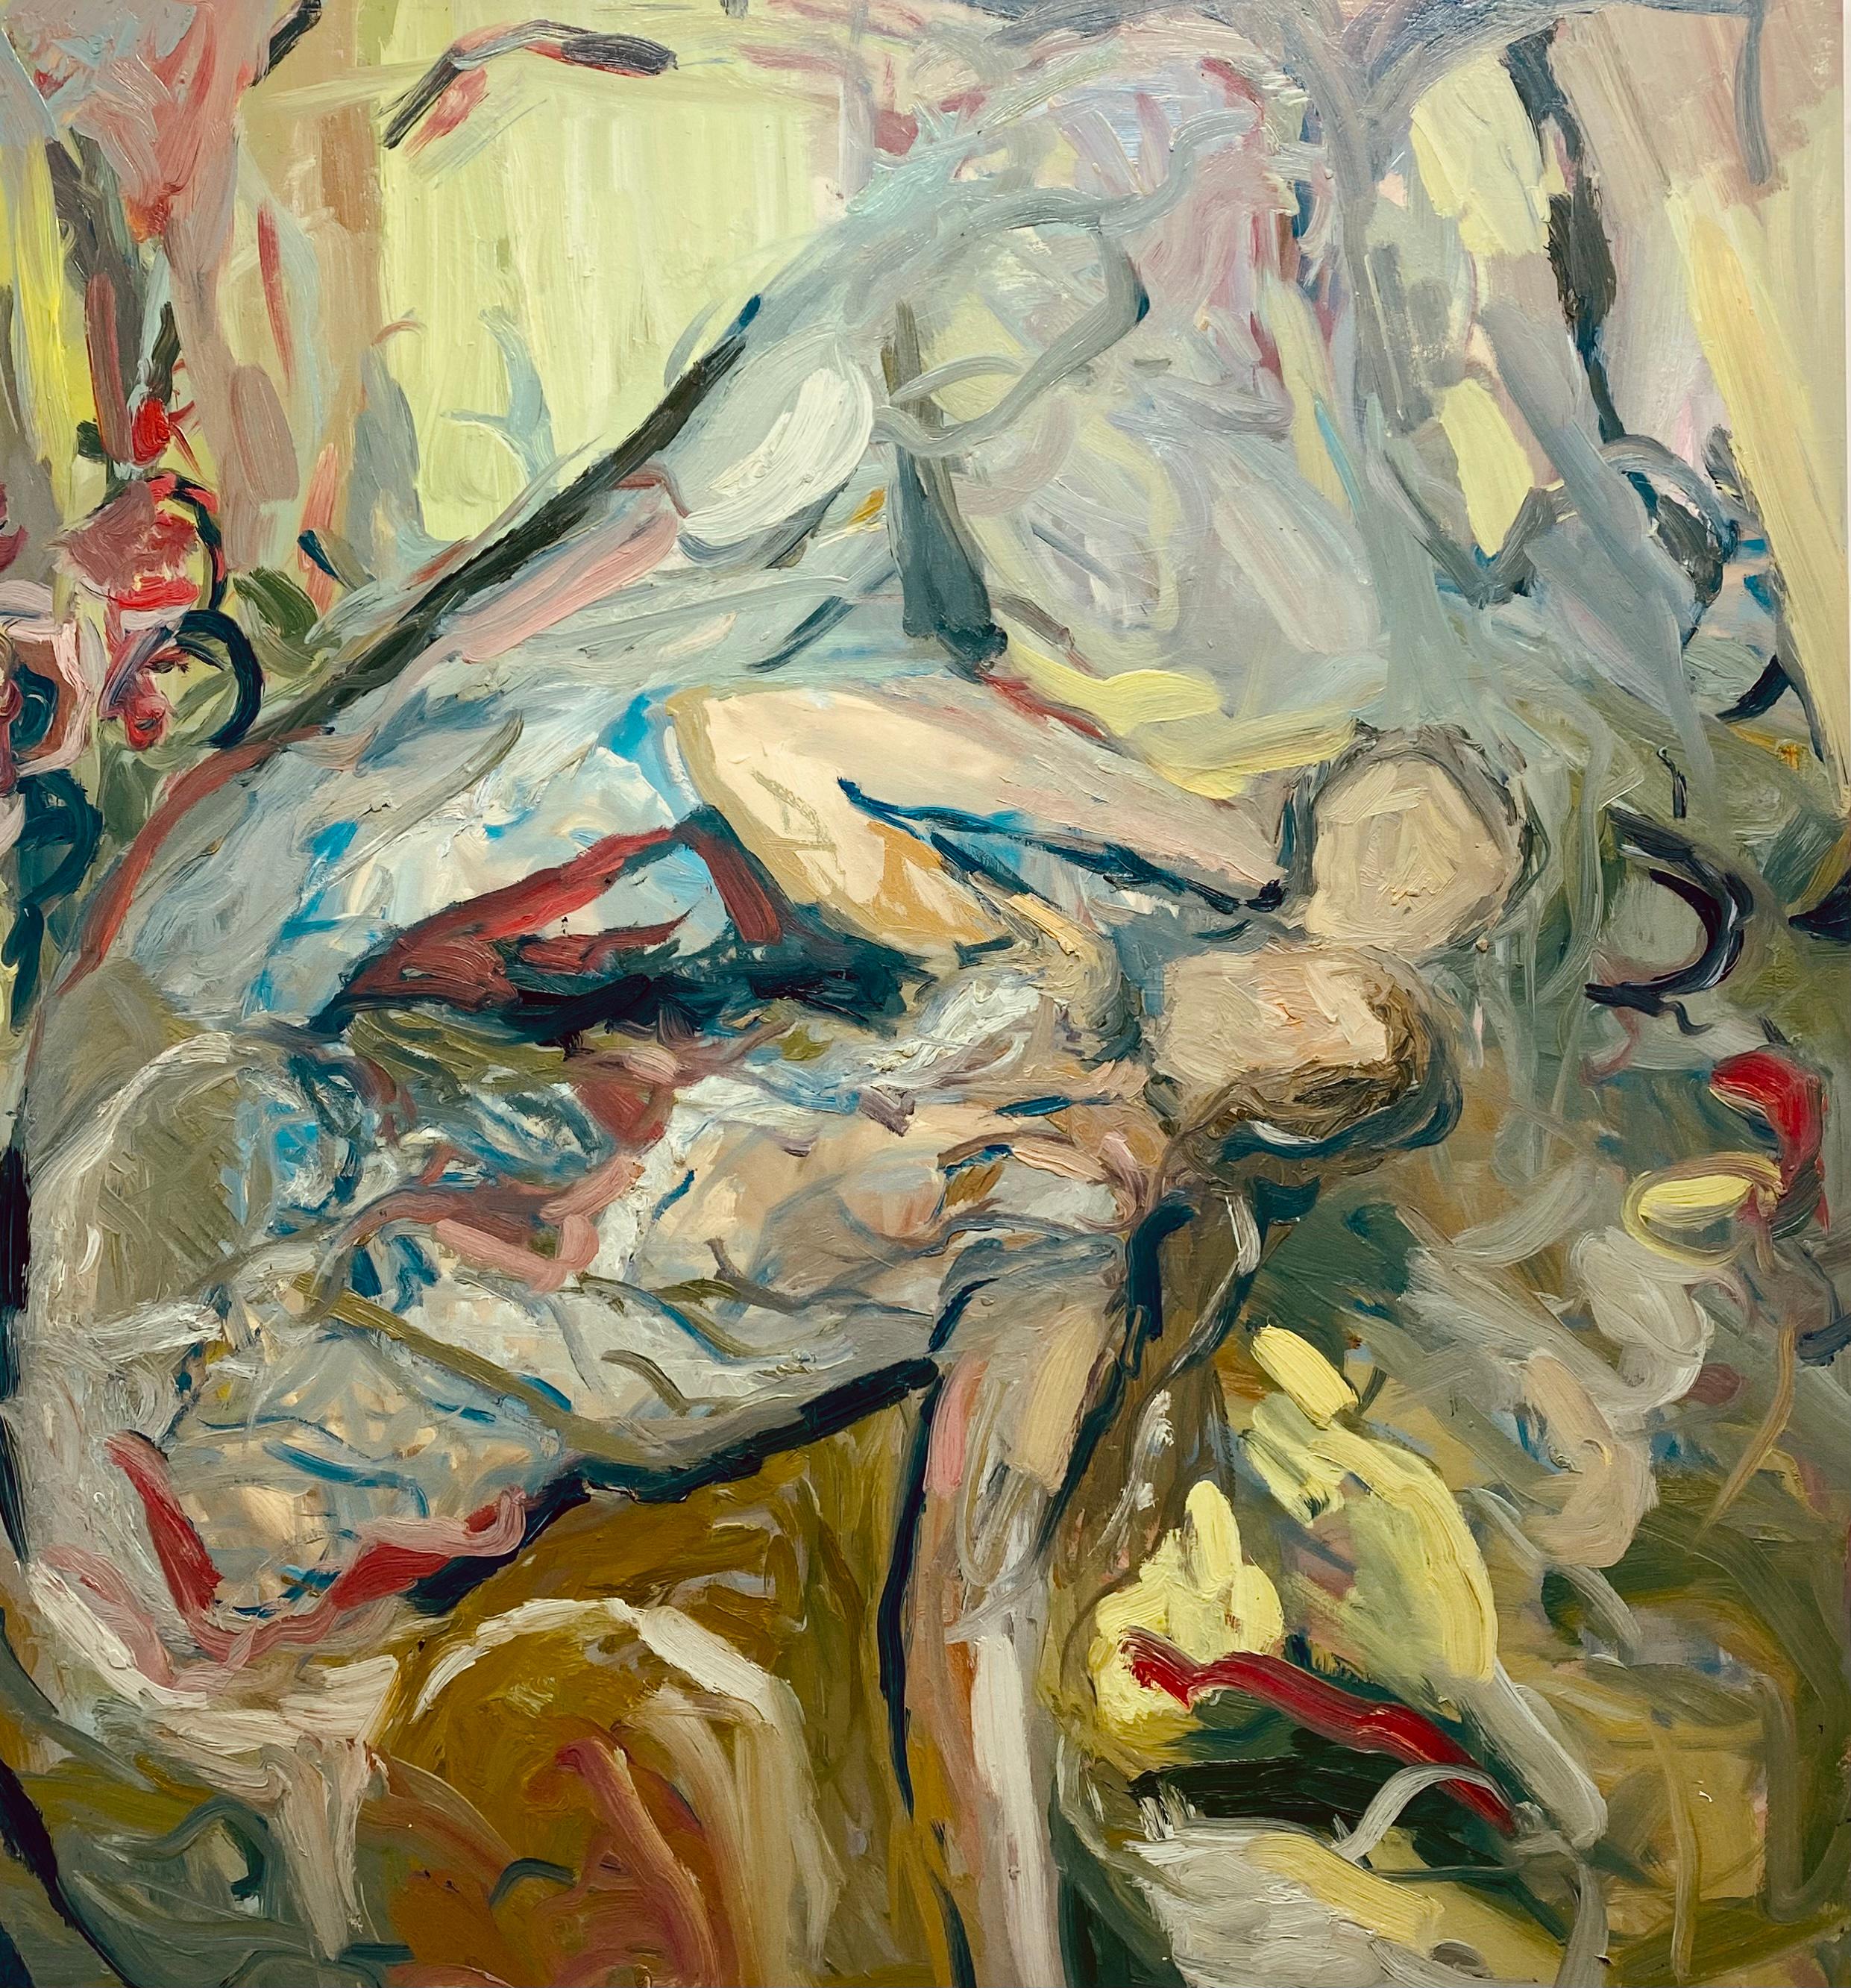 Sleeping Under A Lemon Yellow Sky. Large Expressionist Figurative Oil Painting